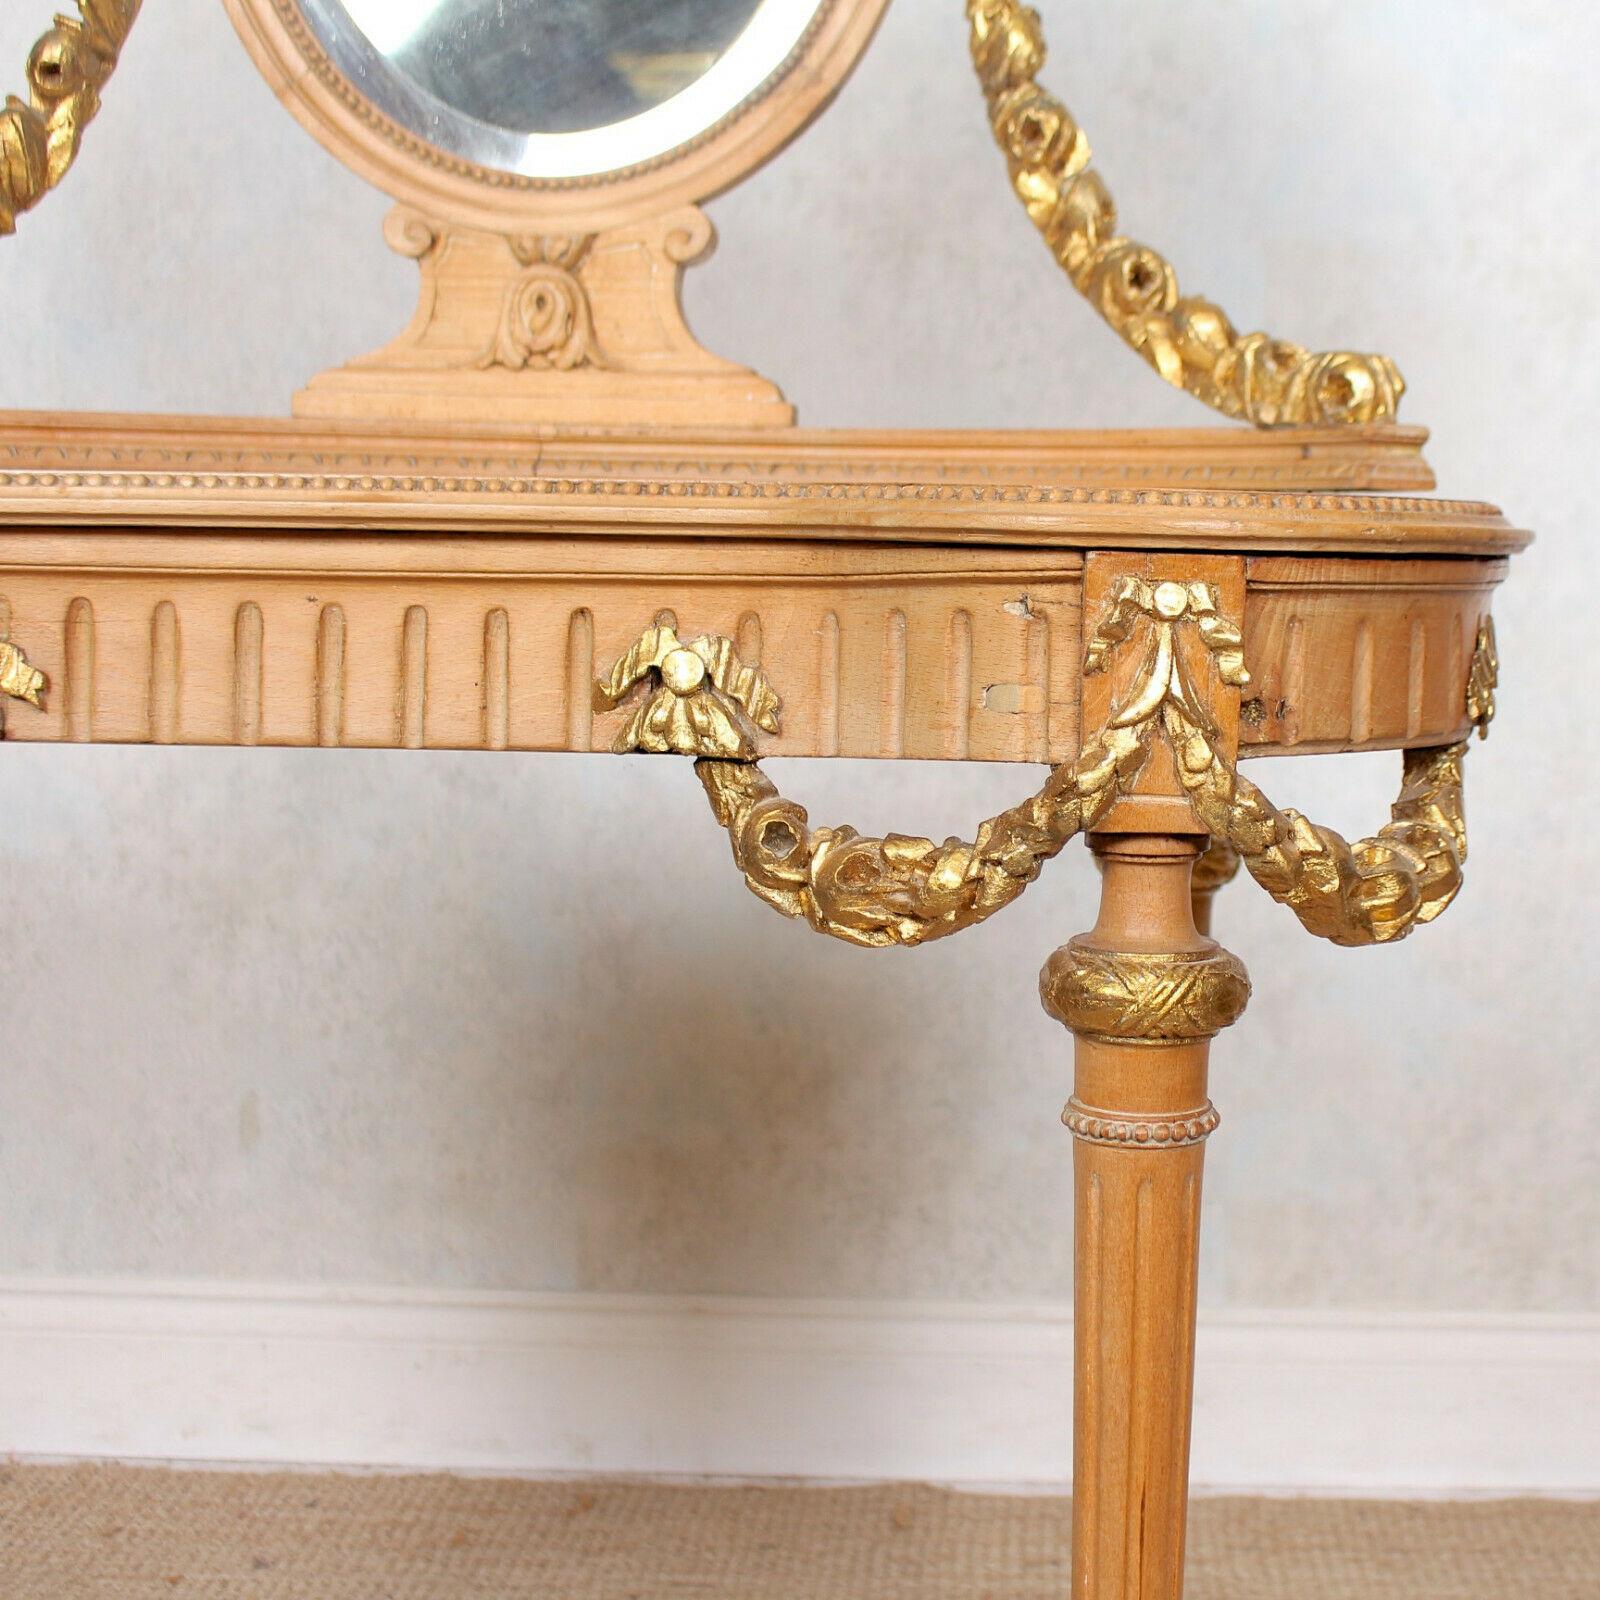 20th Century Neoclassical Marble Dressing Table Gilt Mirrored Vanity Satinwood For Sale